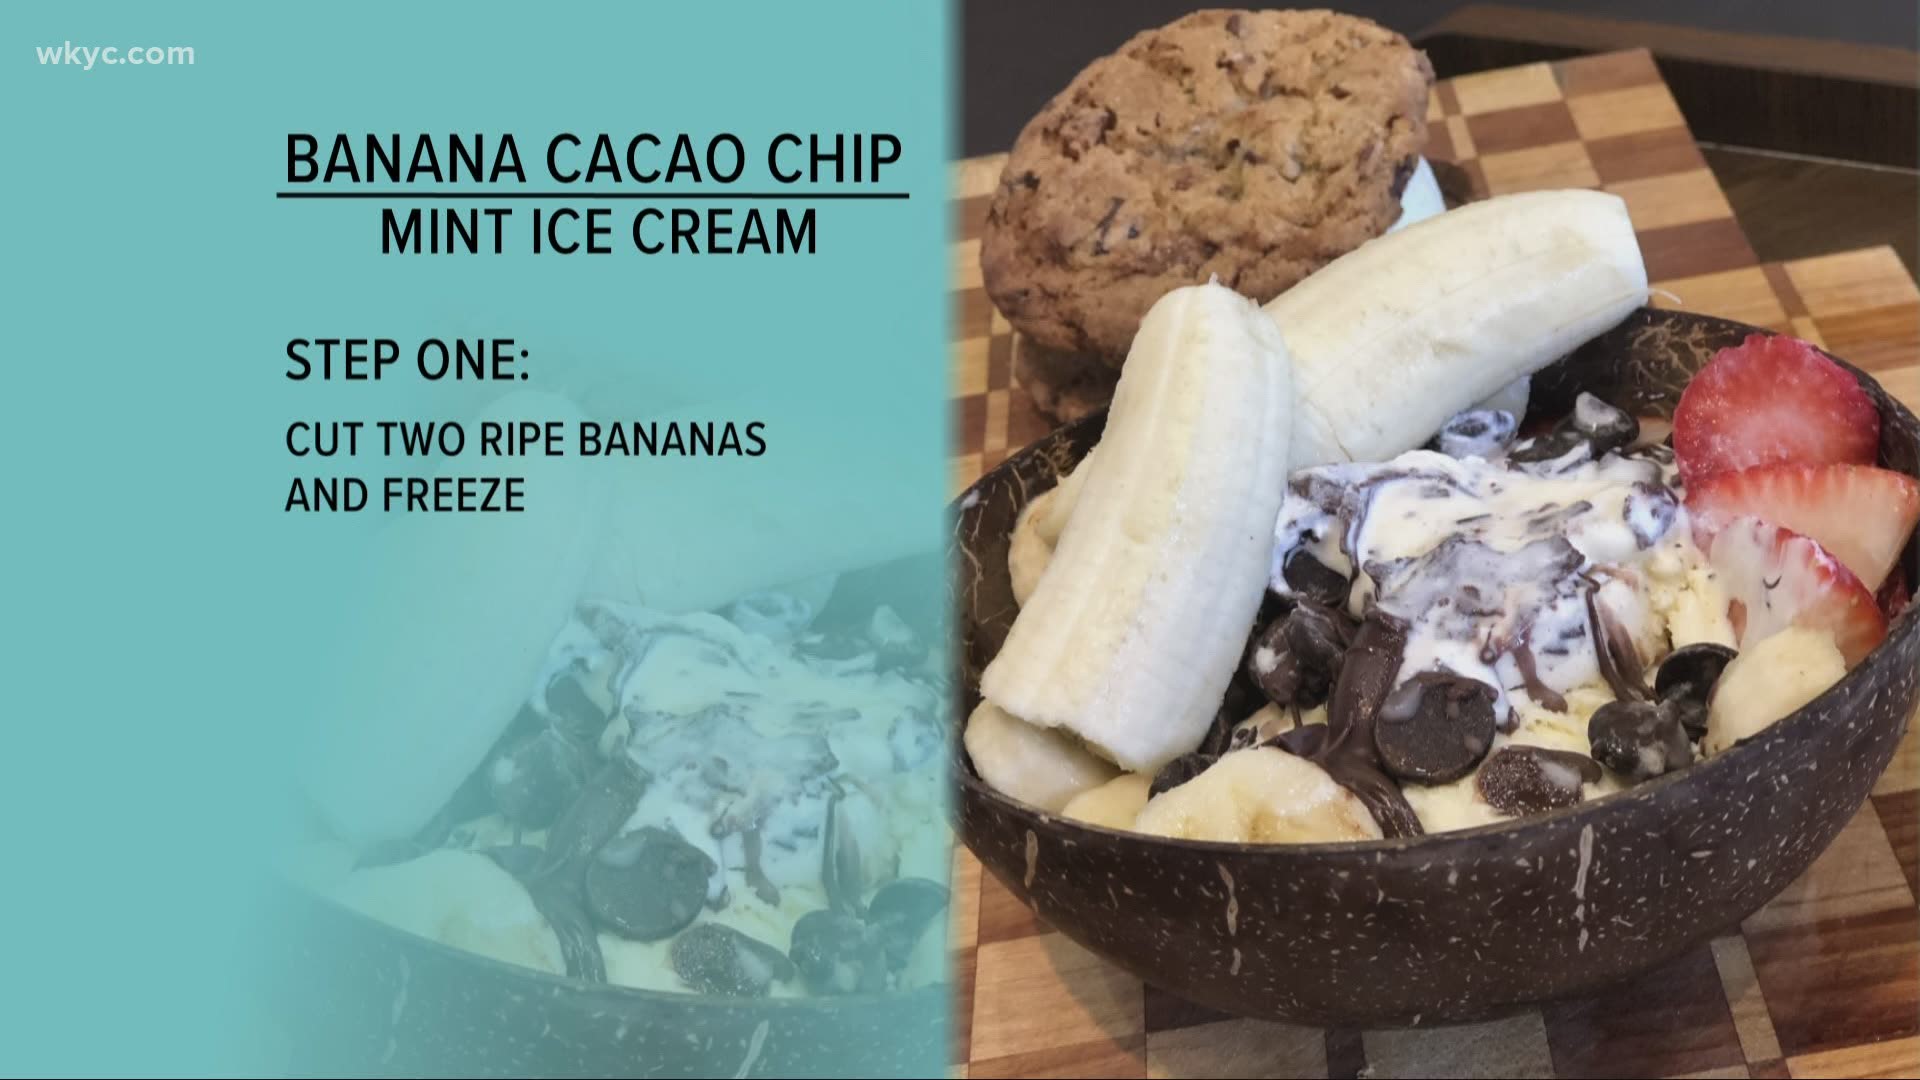 Ice cream is a great summer treat but usually isn't the healthiest.  Chef Anna teaches us a new ice cream recipe with a healthy twist.